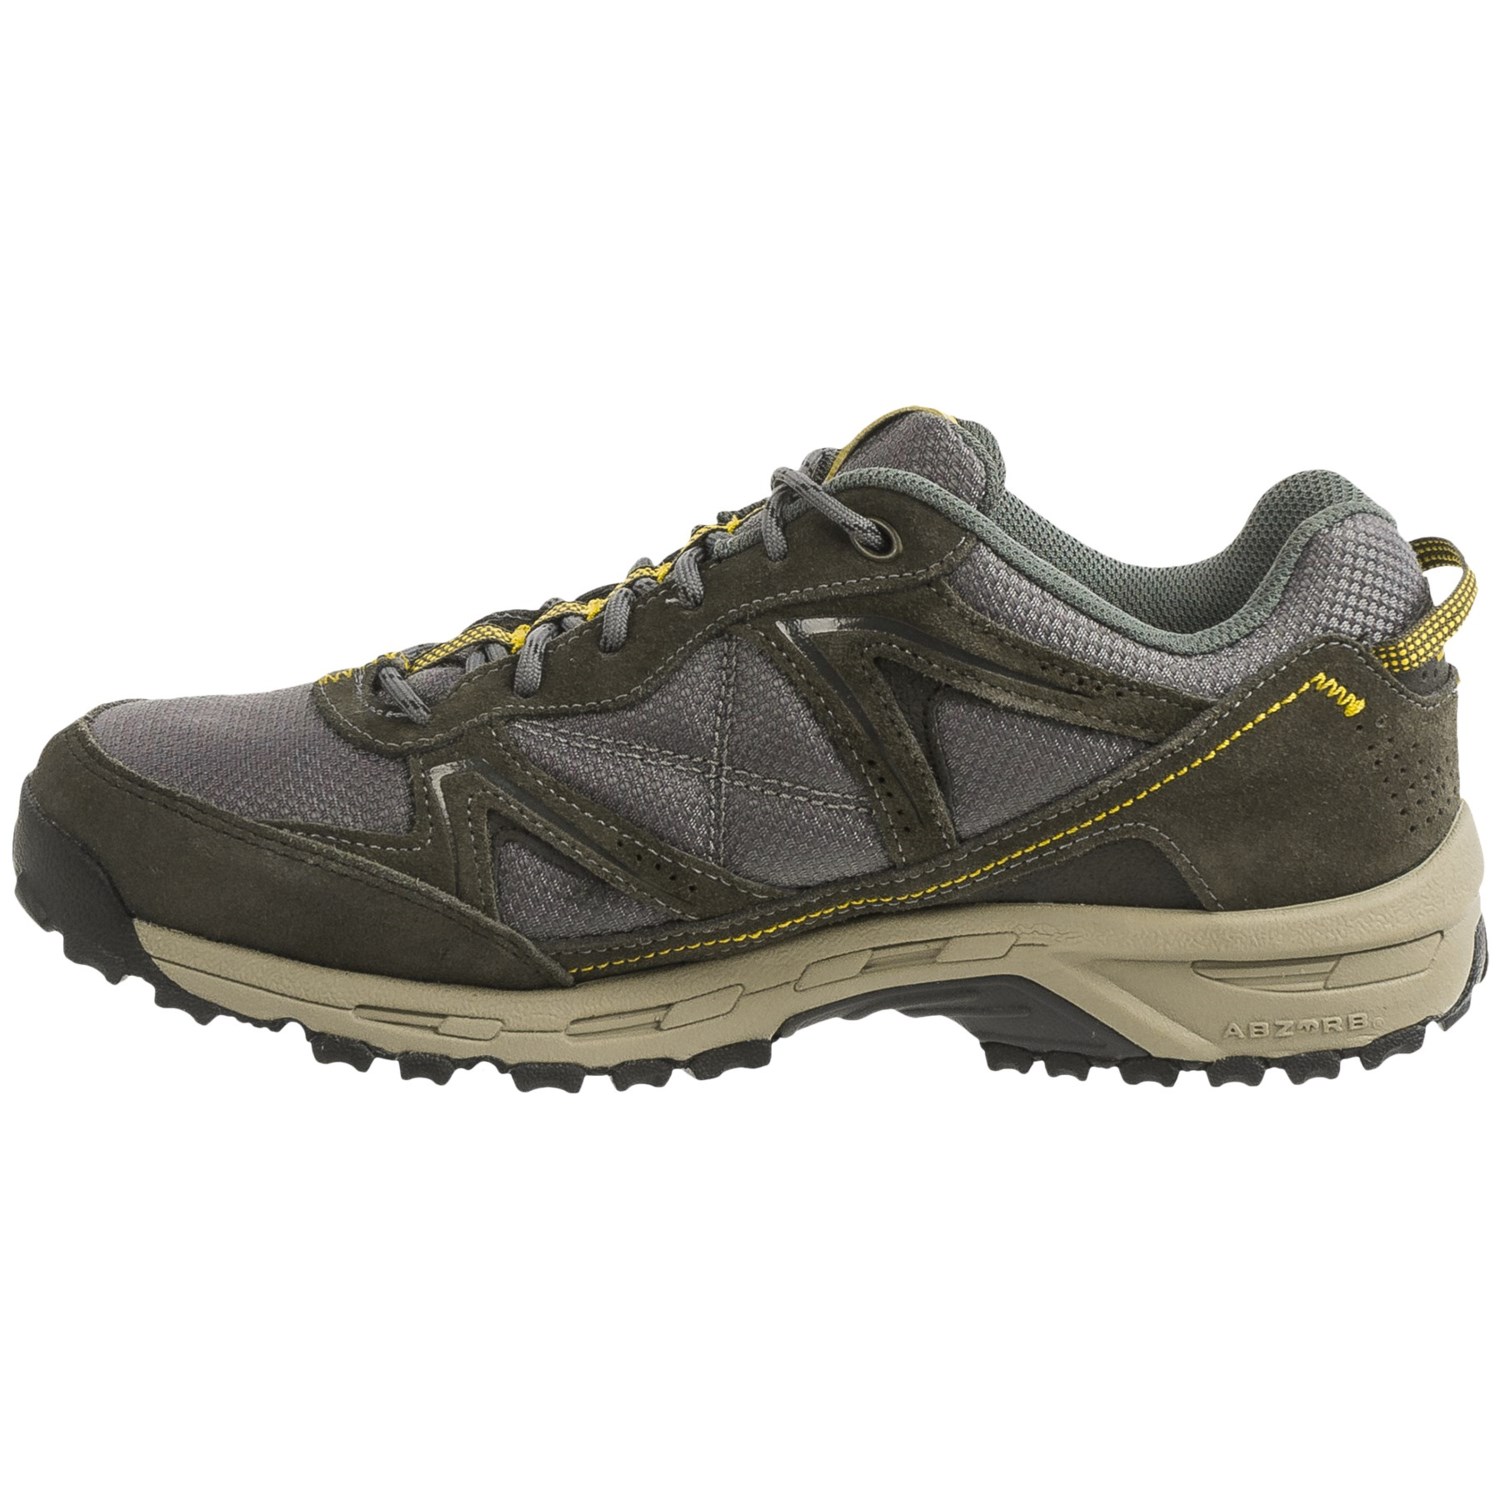 New Balance 659 Hiking Shoes (For Men) - Save 49%